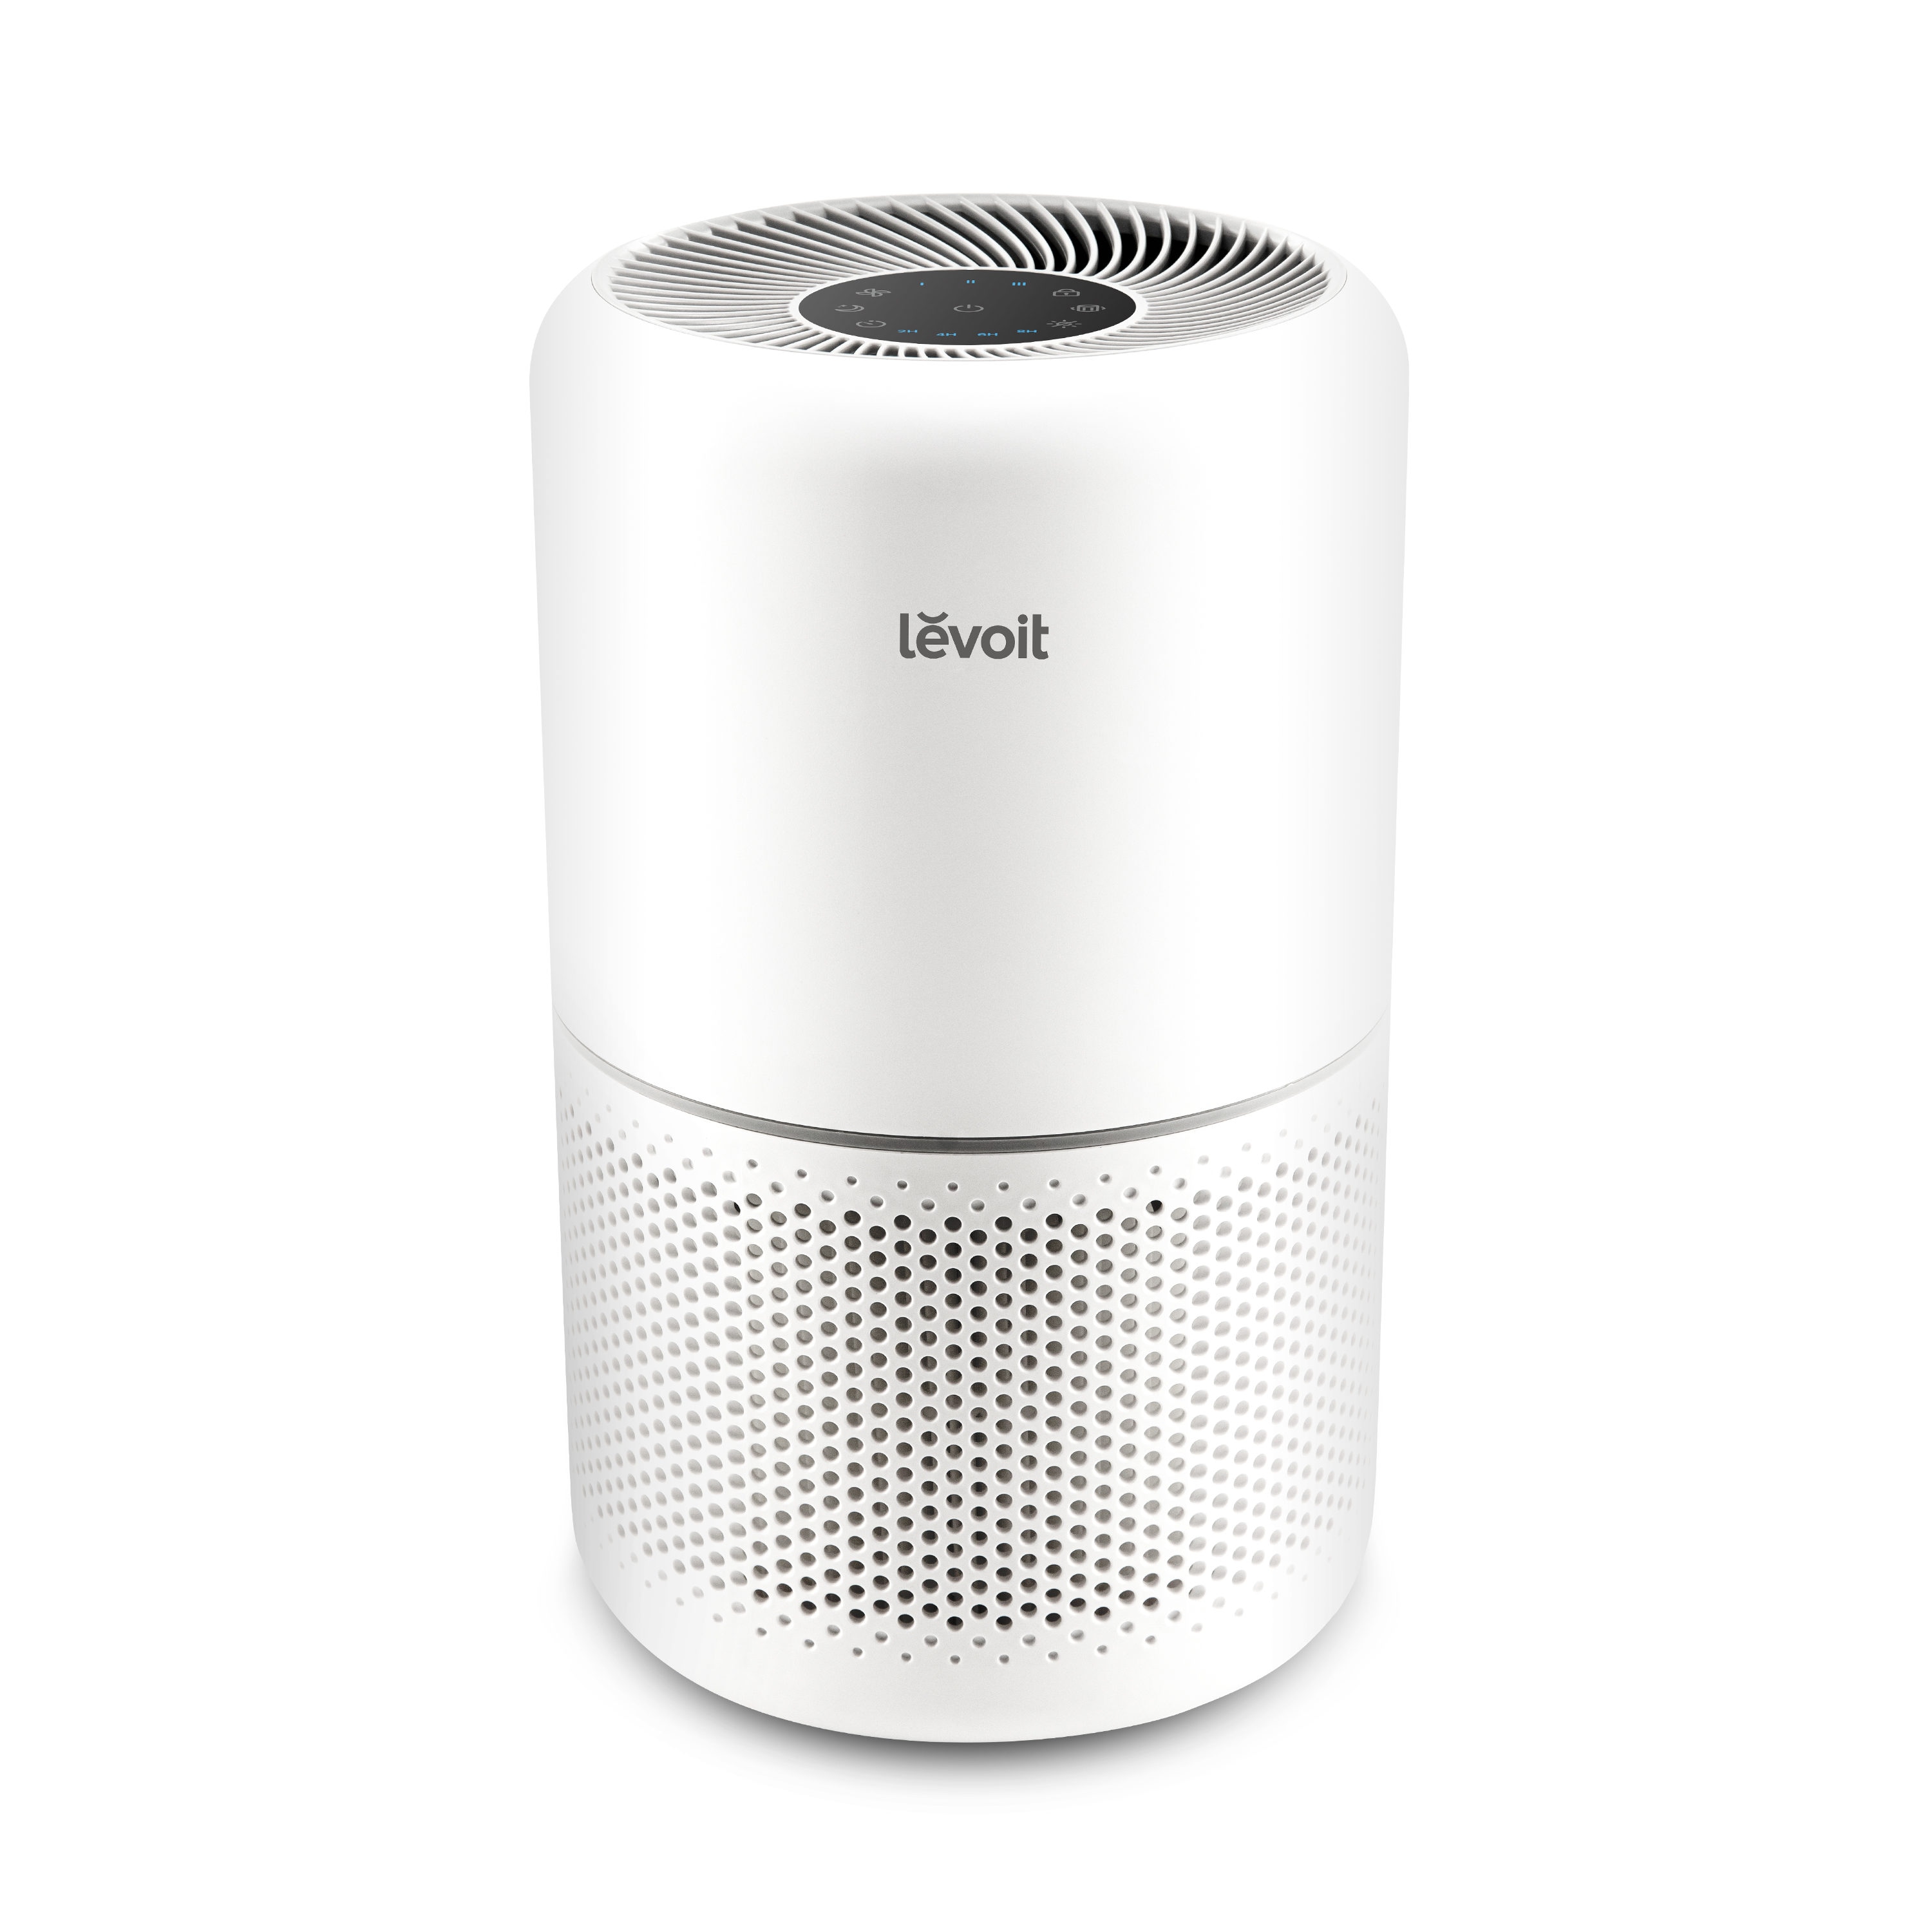 Levoit Air Purifier for Home Bedroom HEPA Fresheners Filter Small Room Cleaner